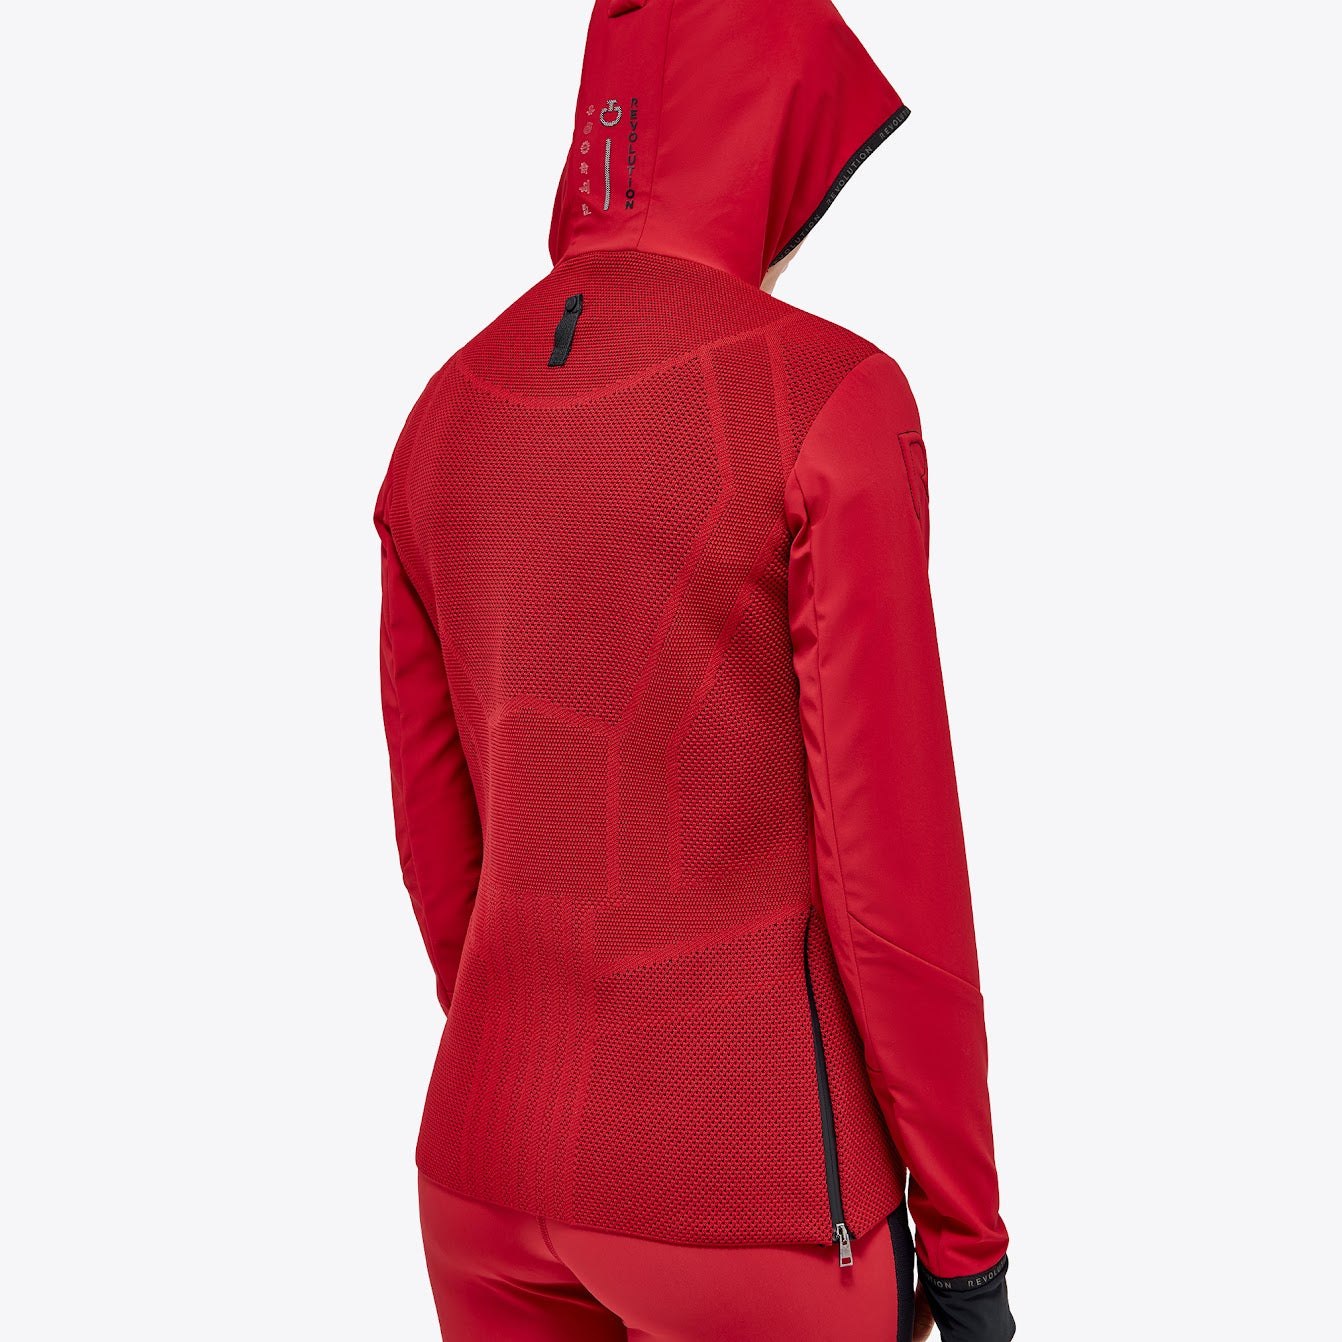 The Cavalleria Toscana Red Revo Jersey Tech Knit Hooded Soft shell jacket is so versatile. The iconic Revo mesh back gives mum movement and flexibility. Side zips and optional neck opening and zip pockets make this jacked is exceptional practical and functional too. As well as looking stylish and on trend.